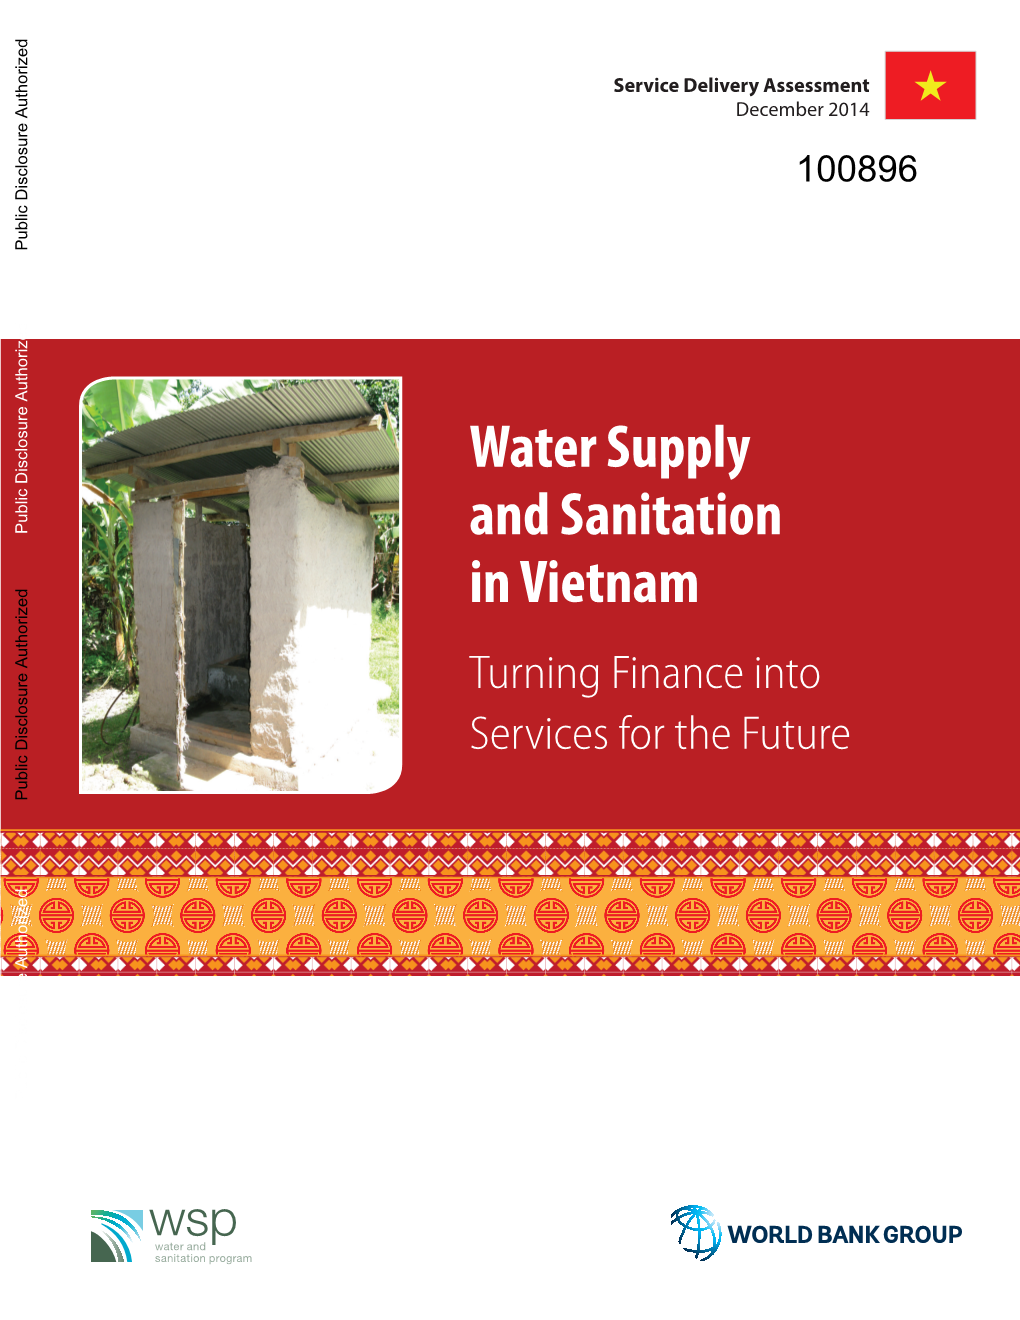 Water Supply and Sanitation in Vietnam